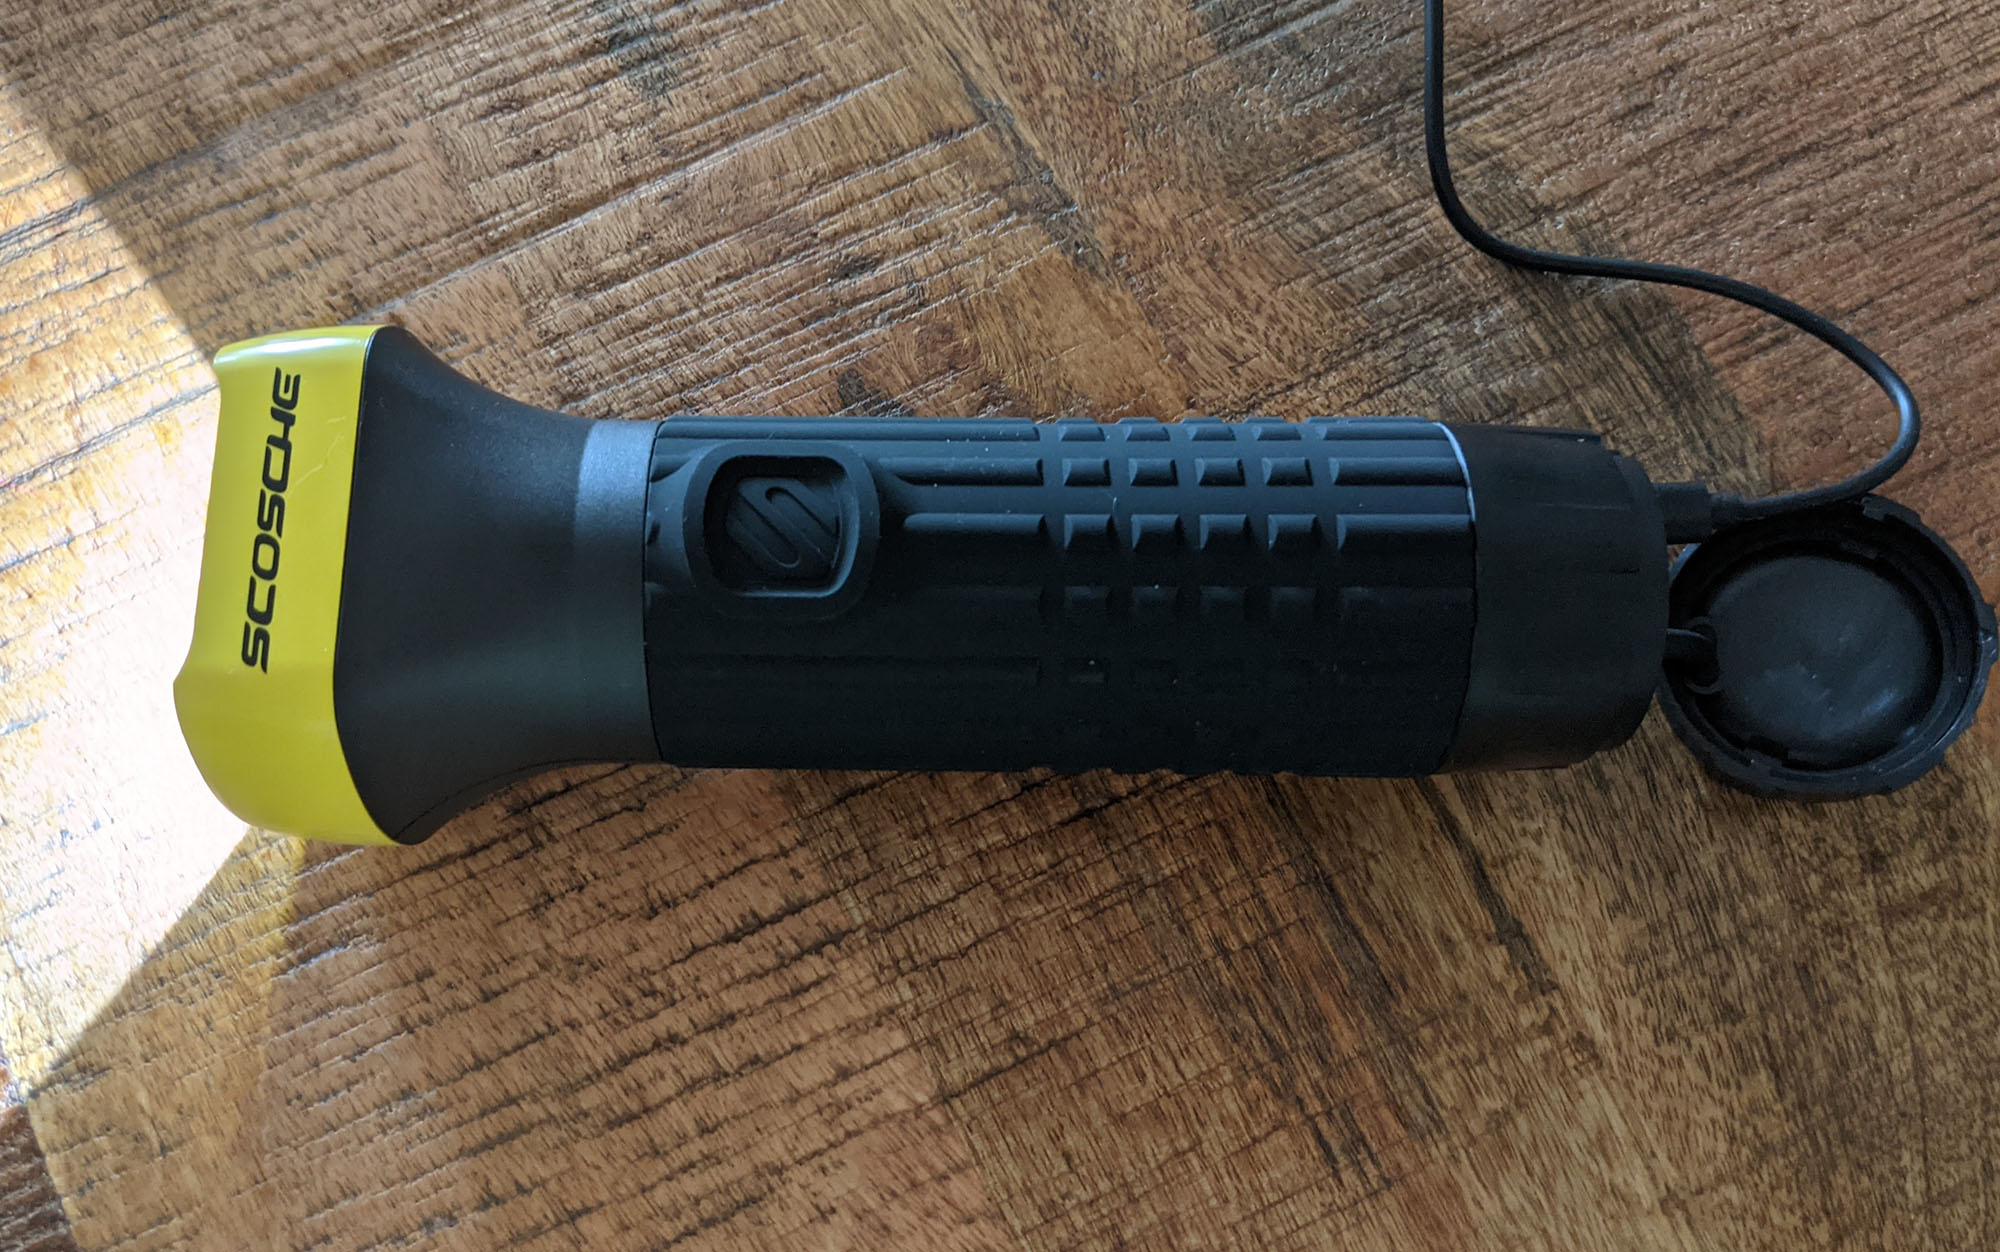 The Scosche Powerup 600 Torch is the best rechargeable flashlight for cars.